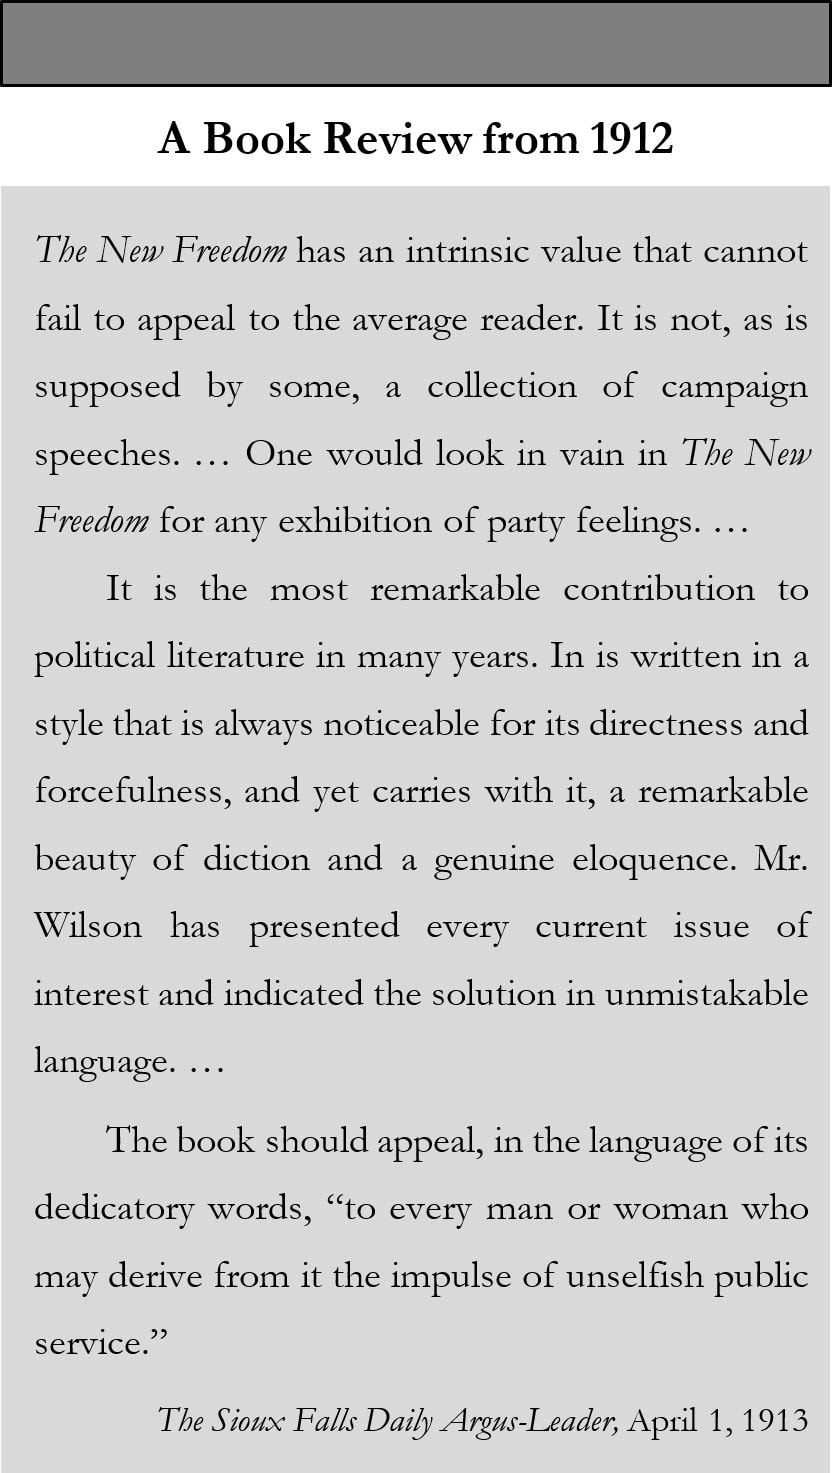 Sidebar image of a book review from 1912 of Woodrow Wilson's New Freedom.